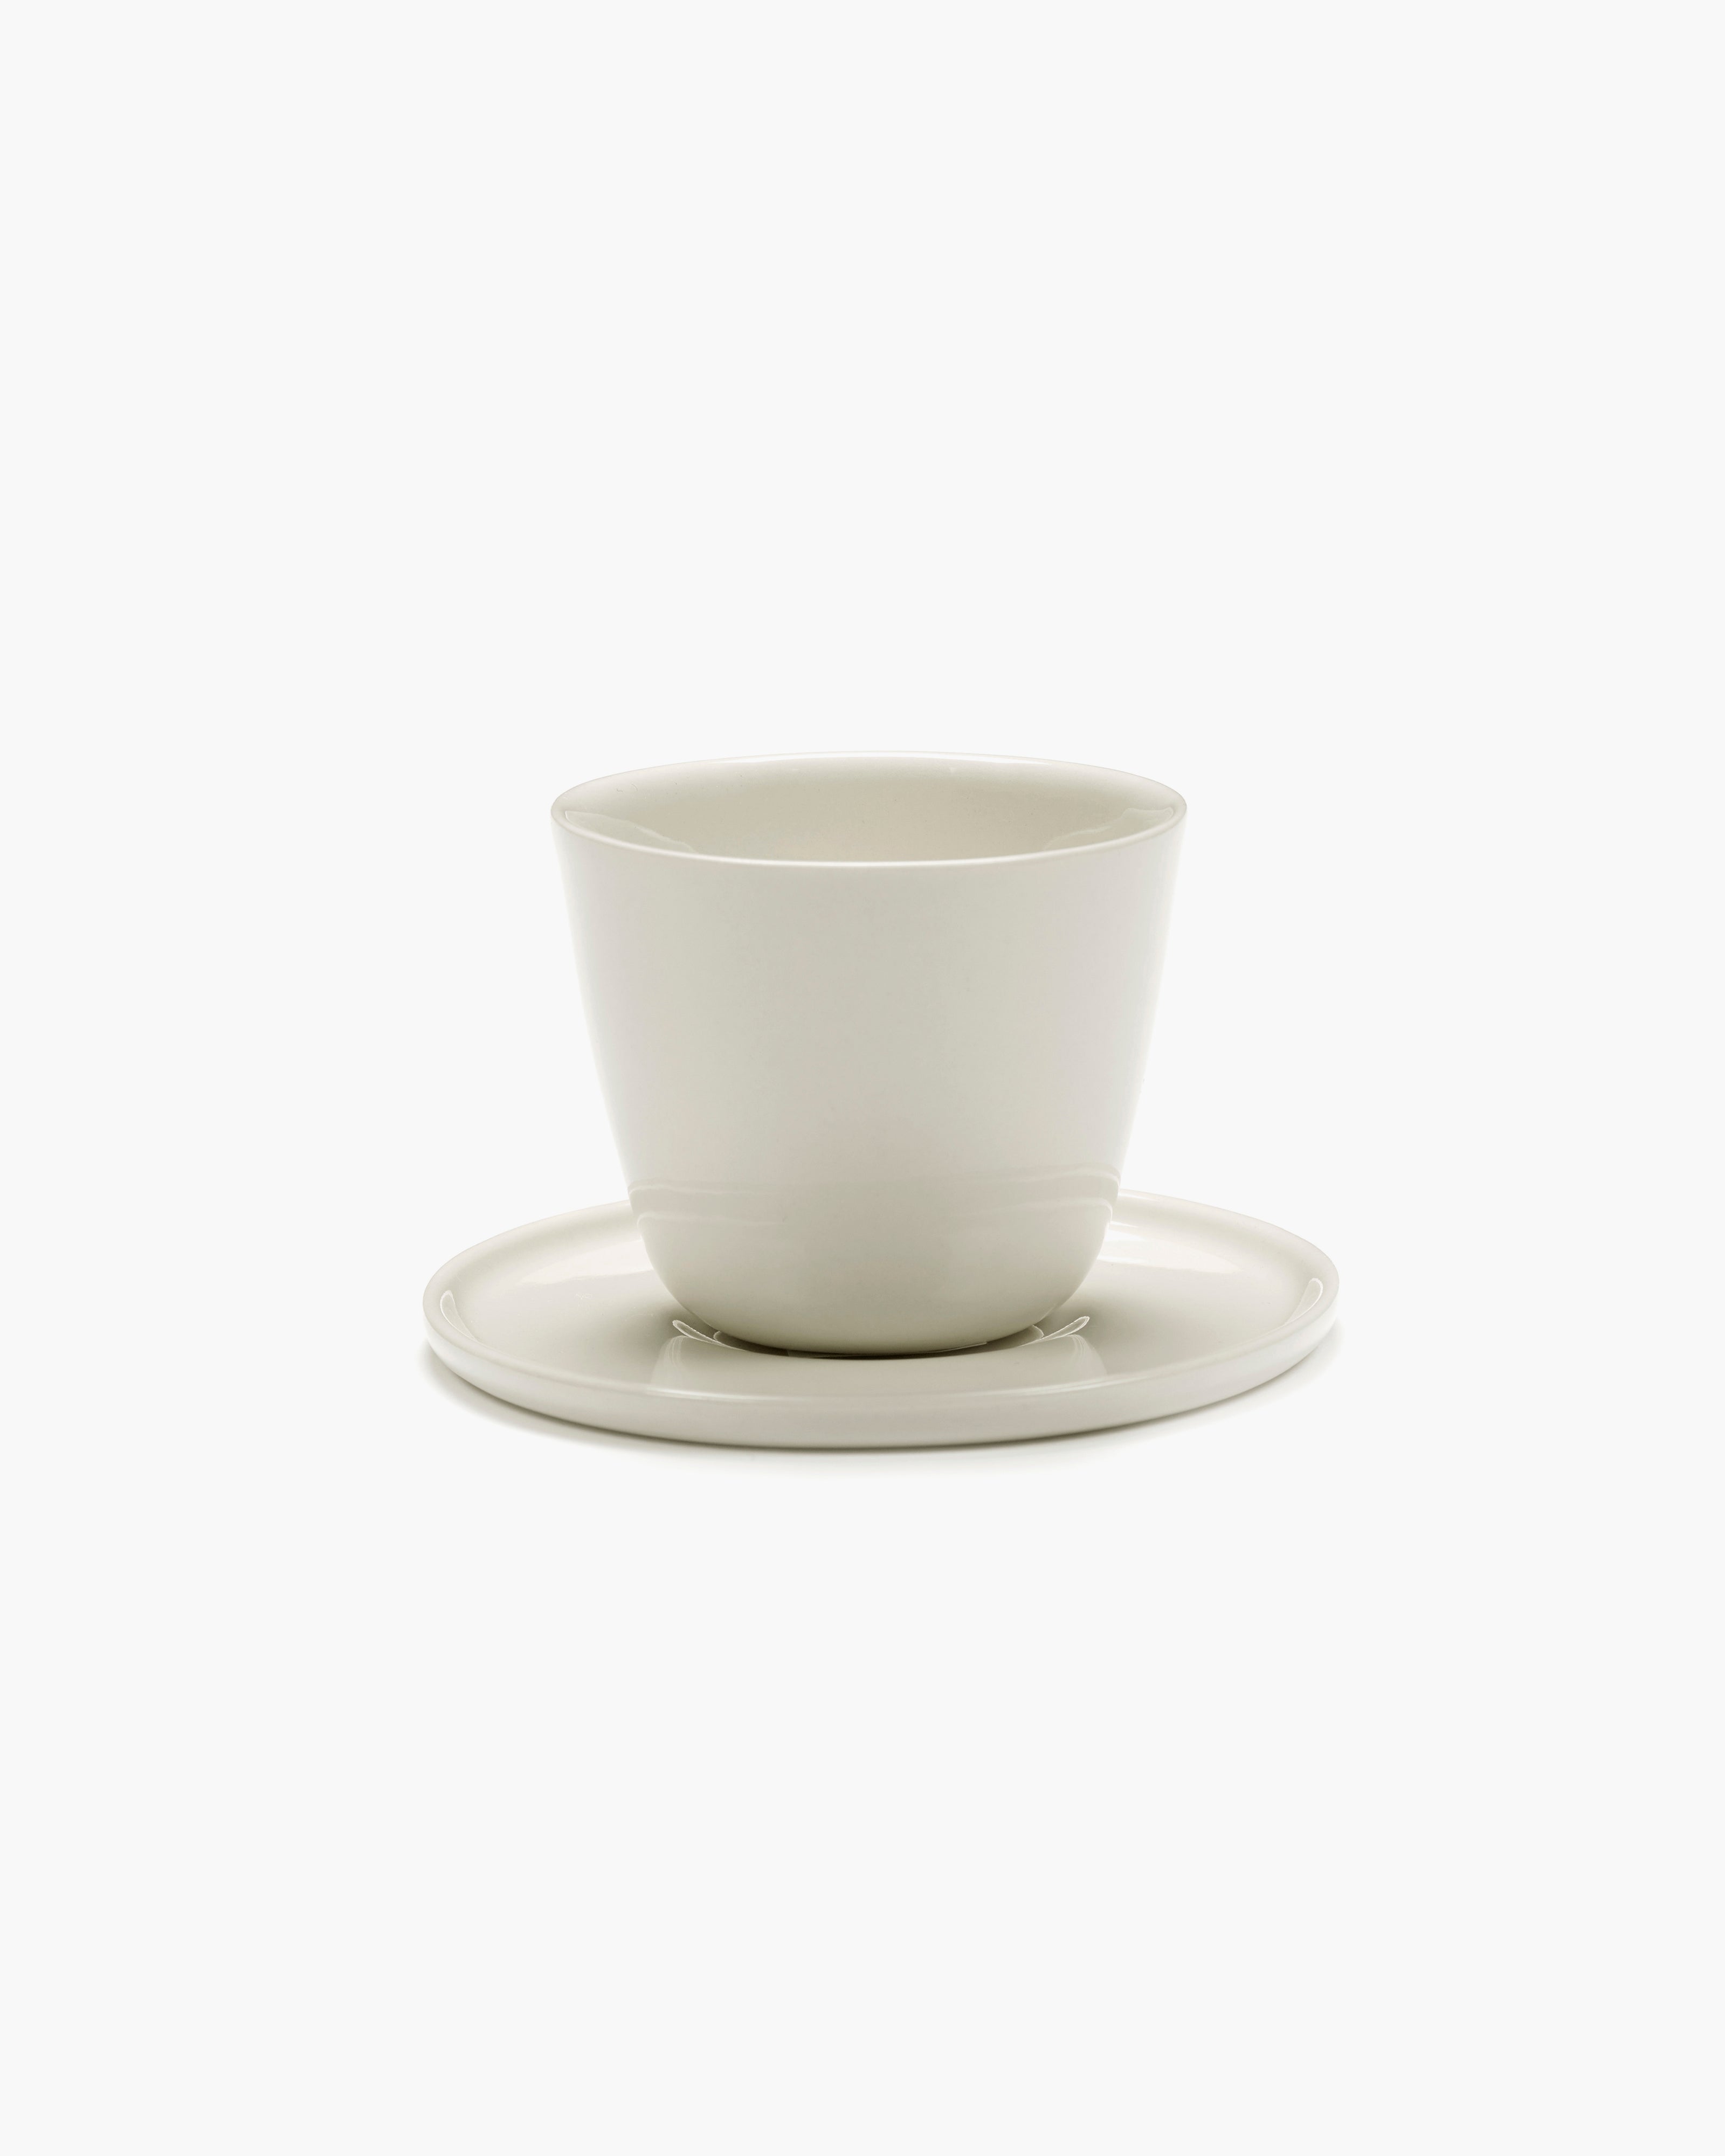 Small Ivory White Demitasse Espresso Cup with Matching Saucer on a